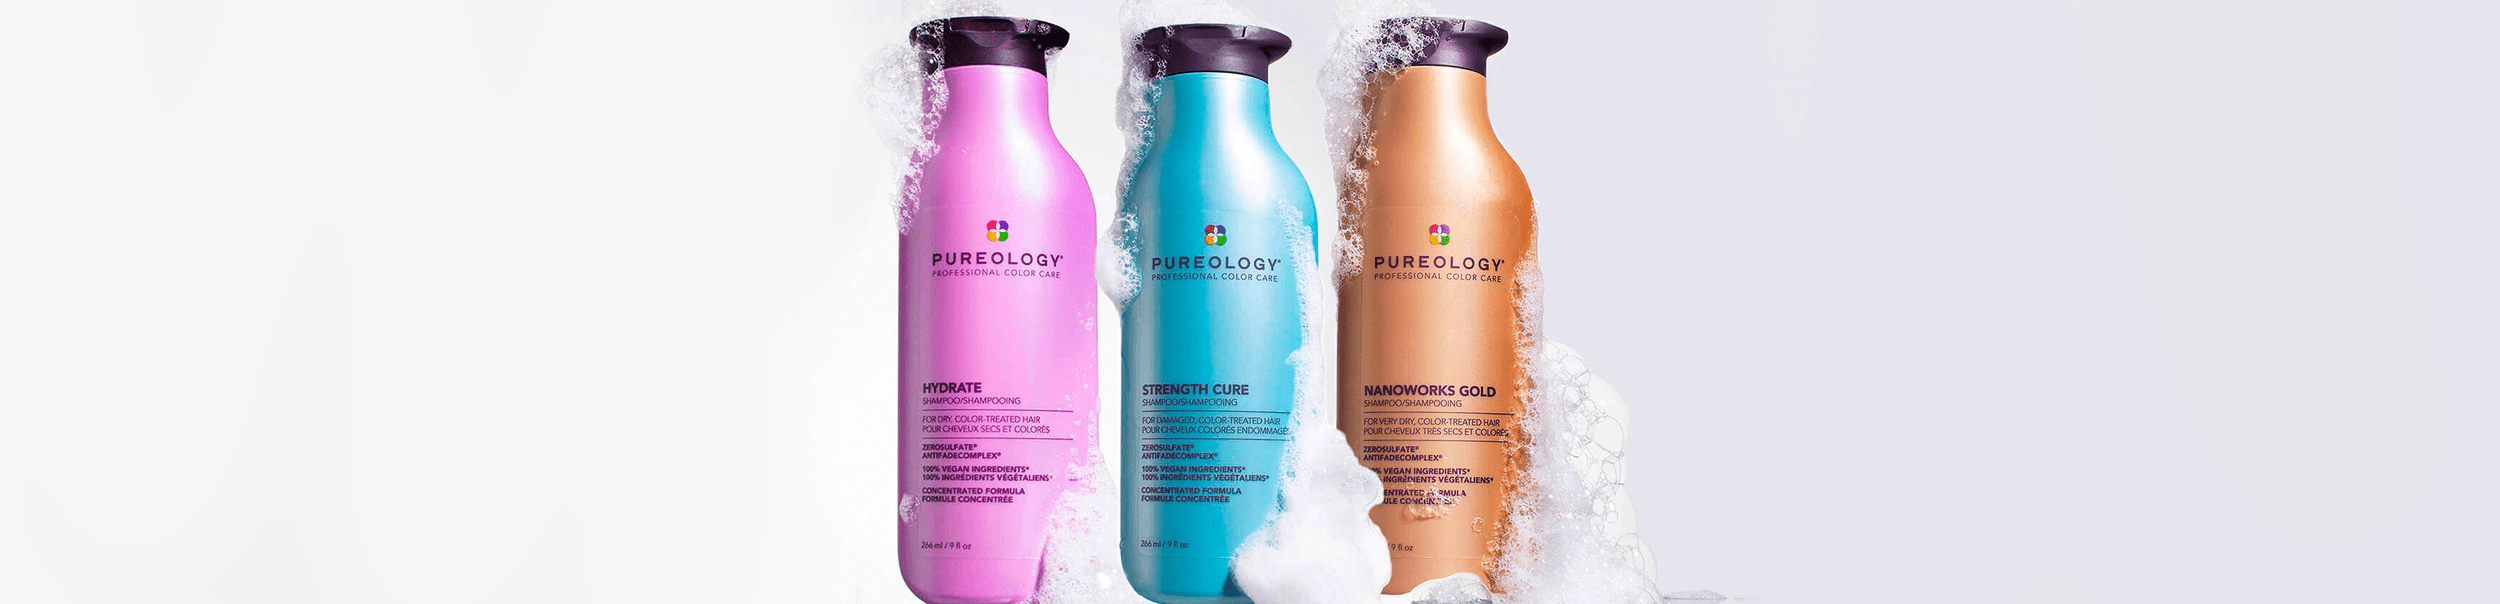 https://www.lookfantastic.com/pureology-hydrate-shampoo-and-conditioner-duo-2-x-266ml/12659566.html